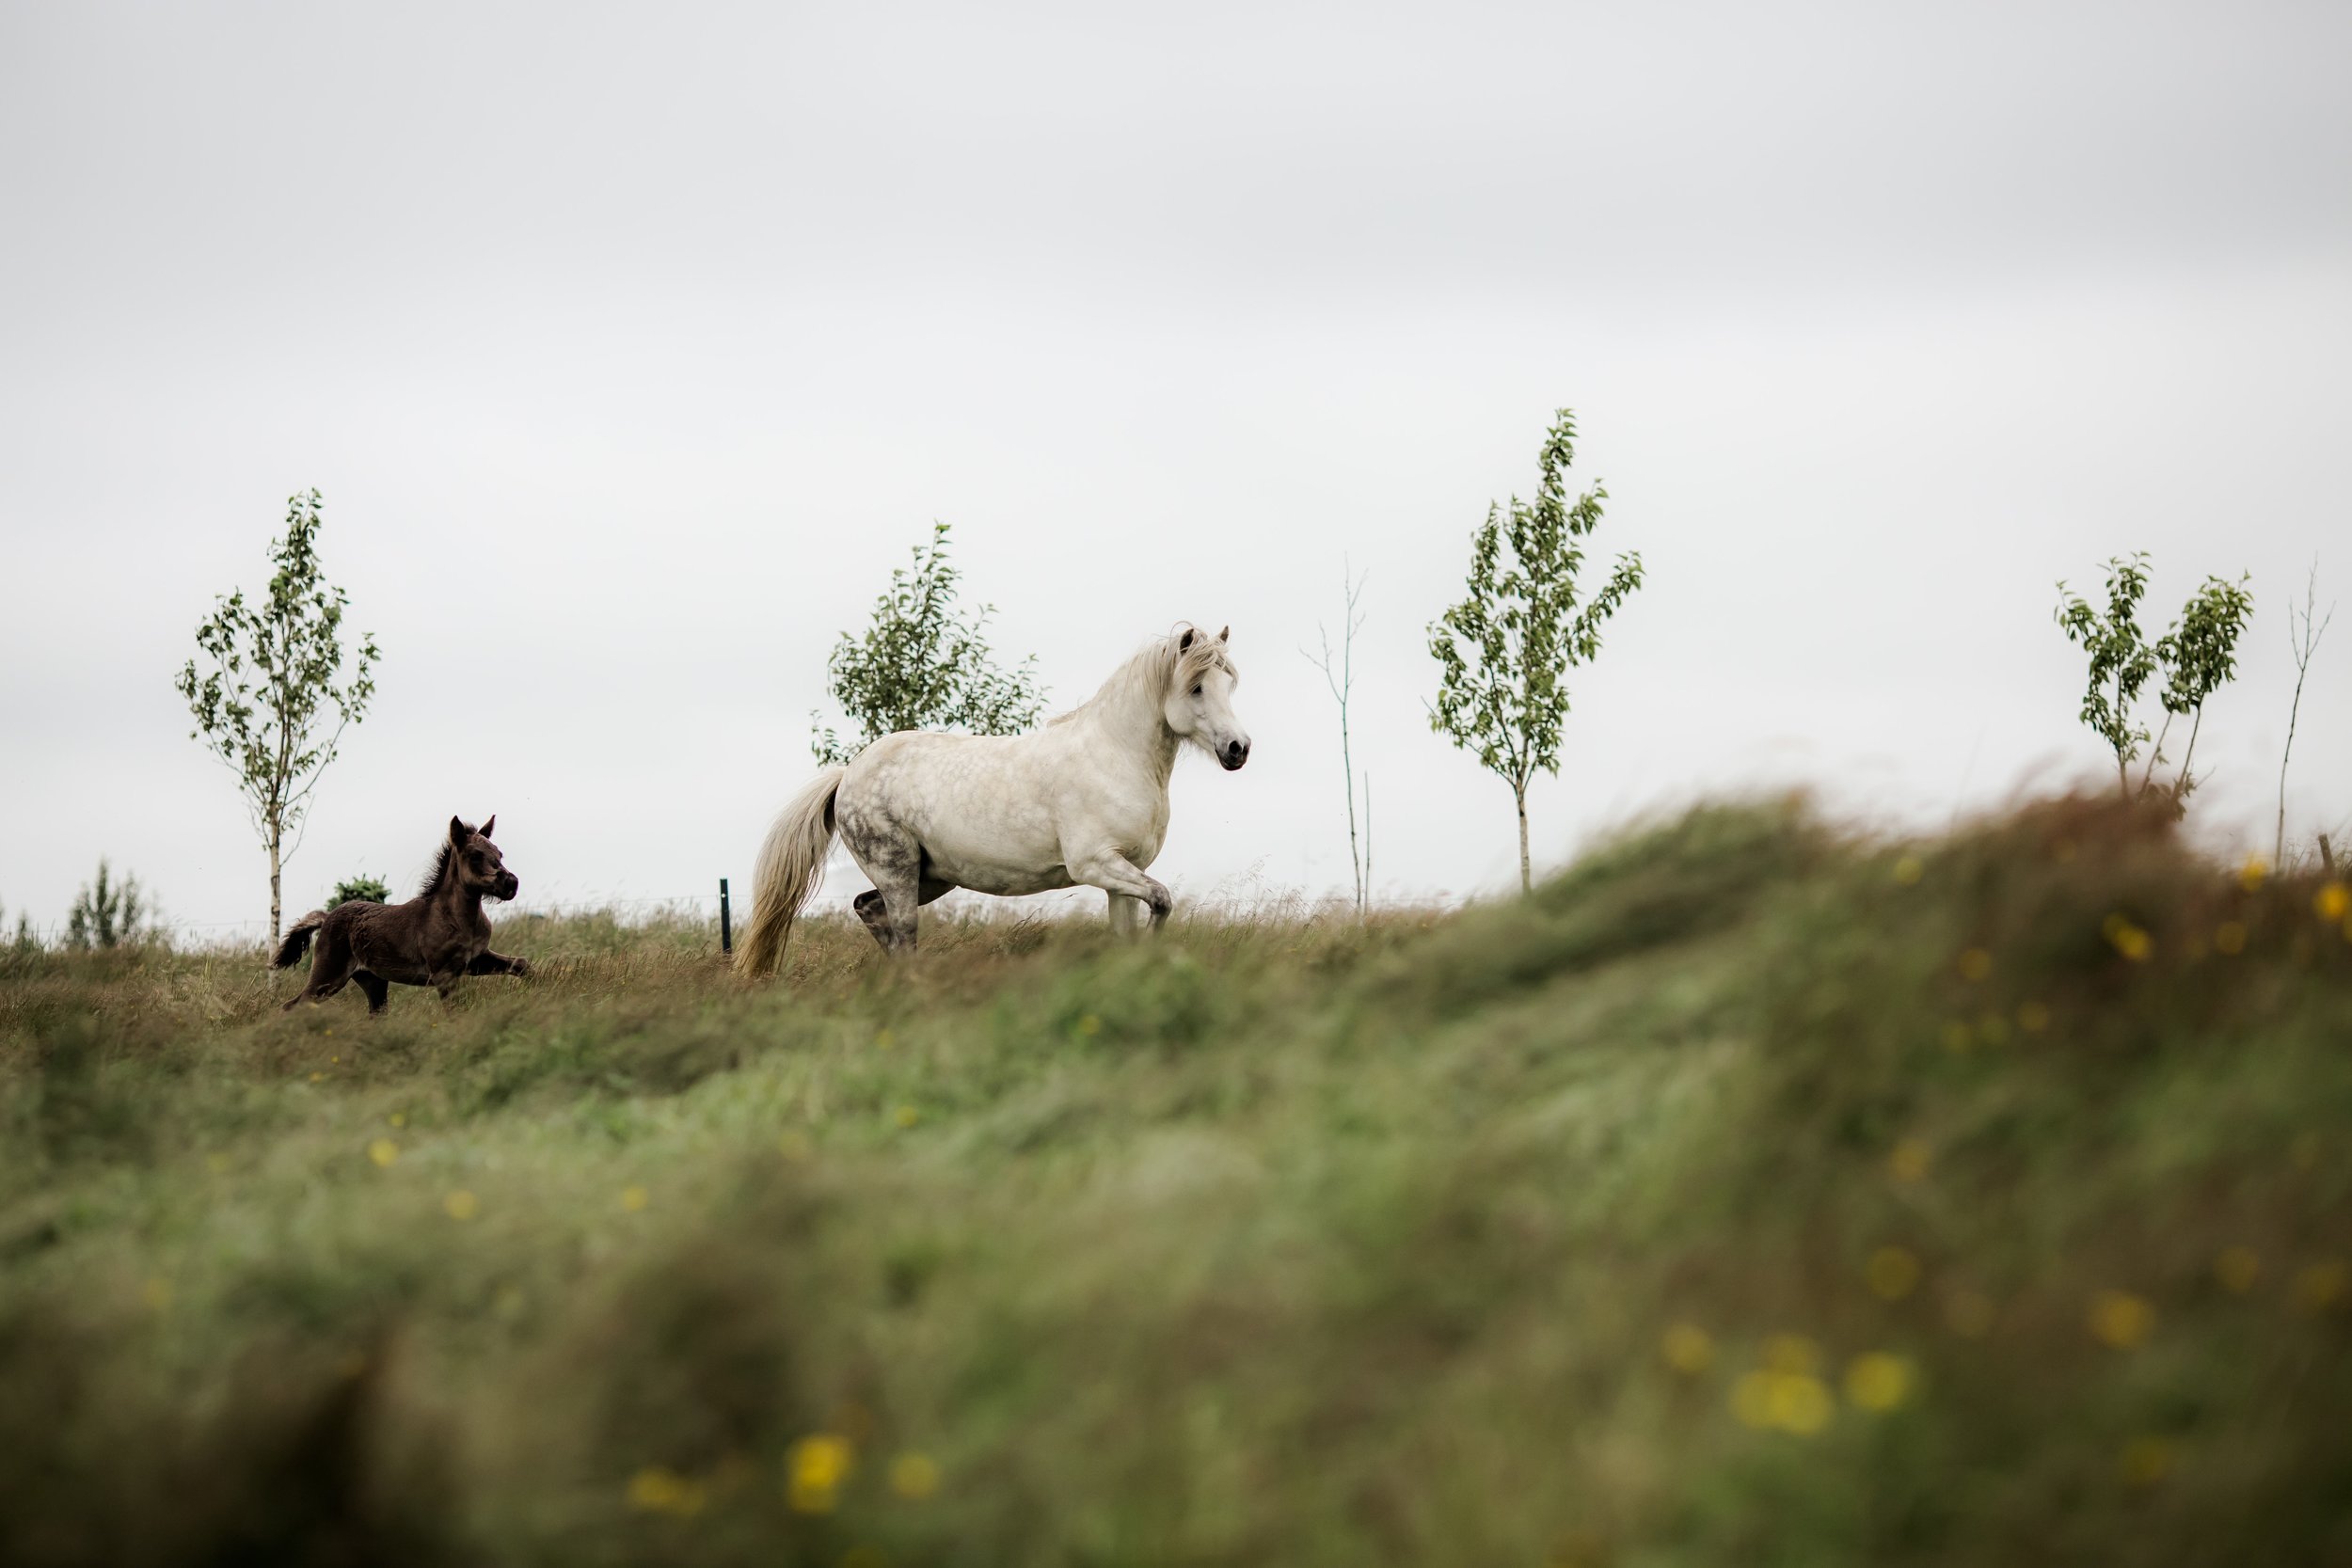 Horses in Iceland by Christina Swanson now on Cottage Hill49.jpg